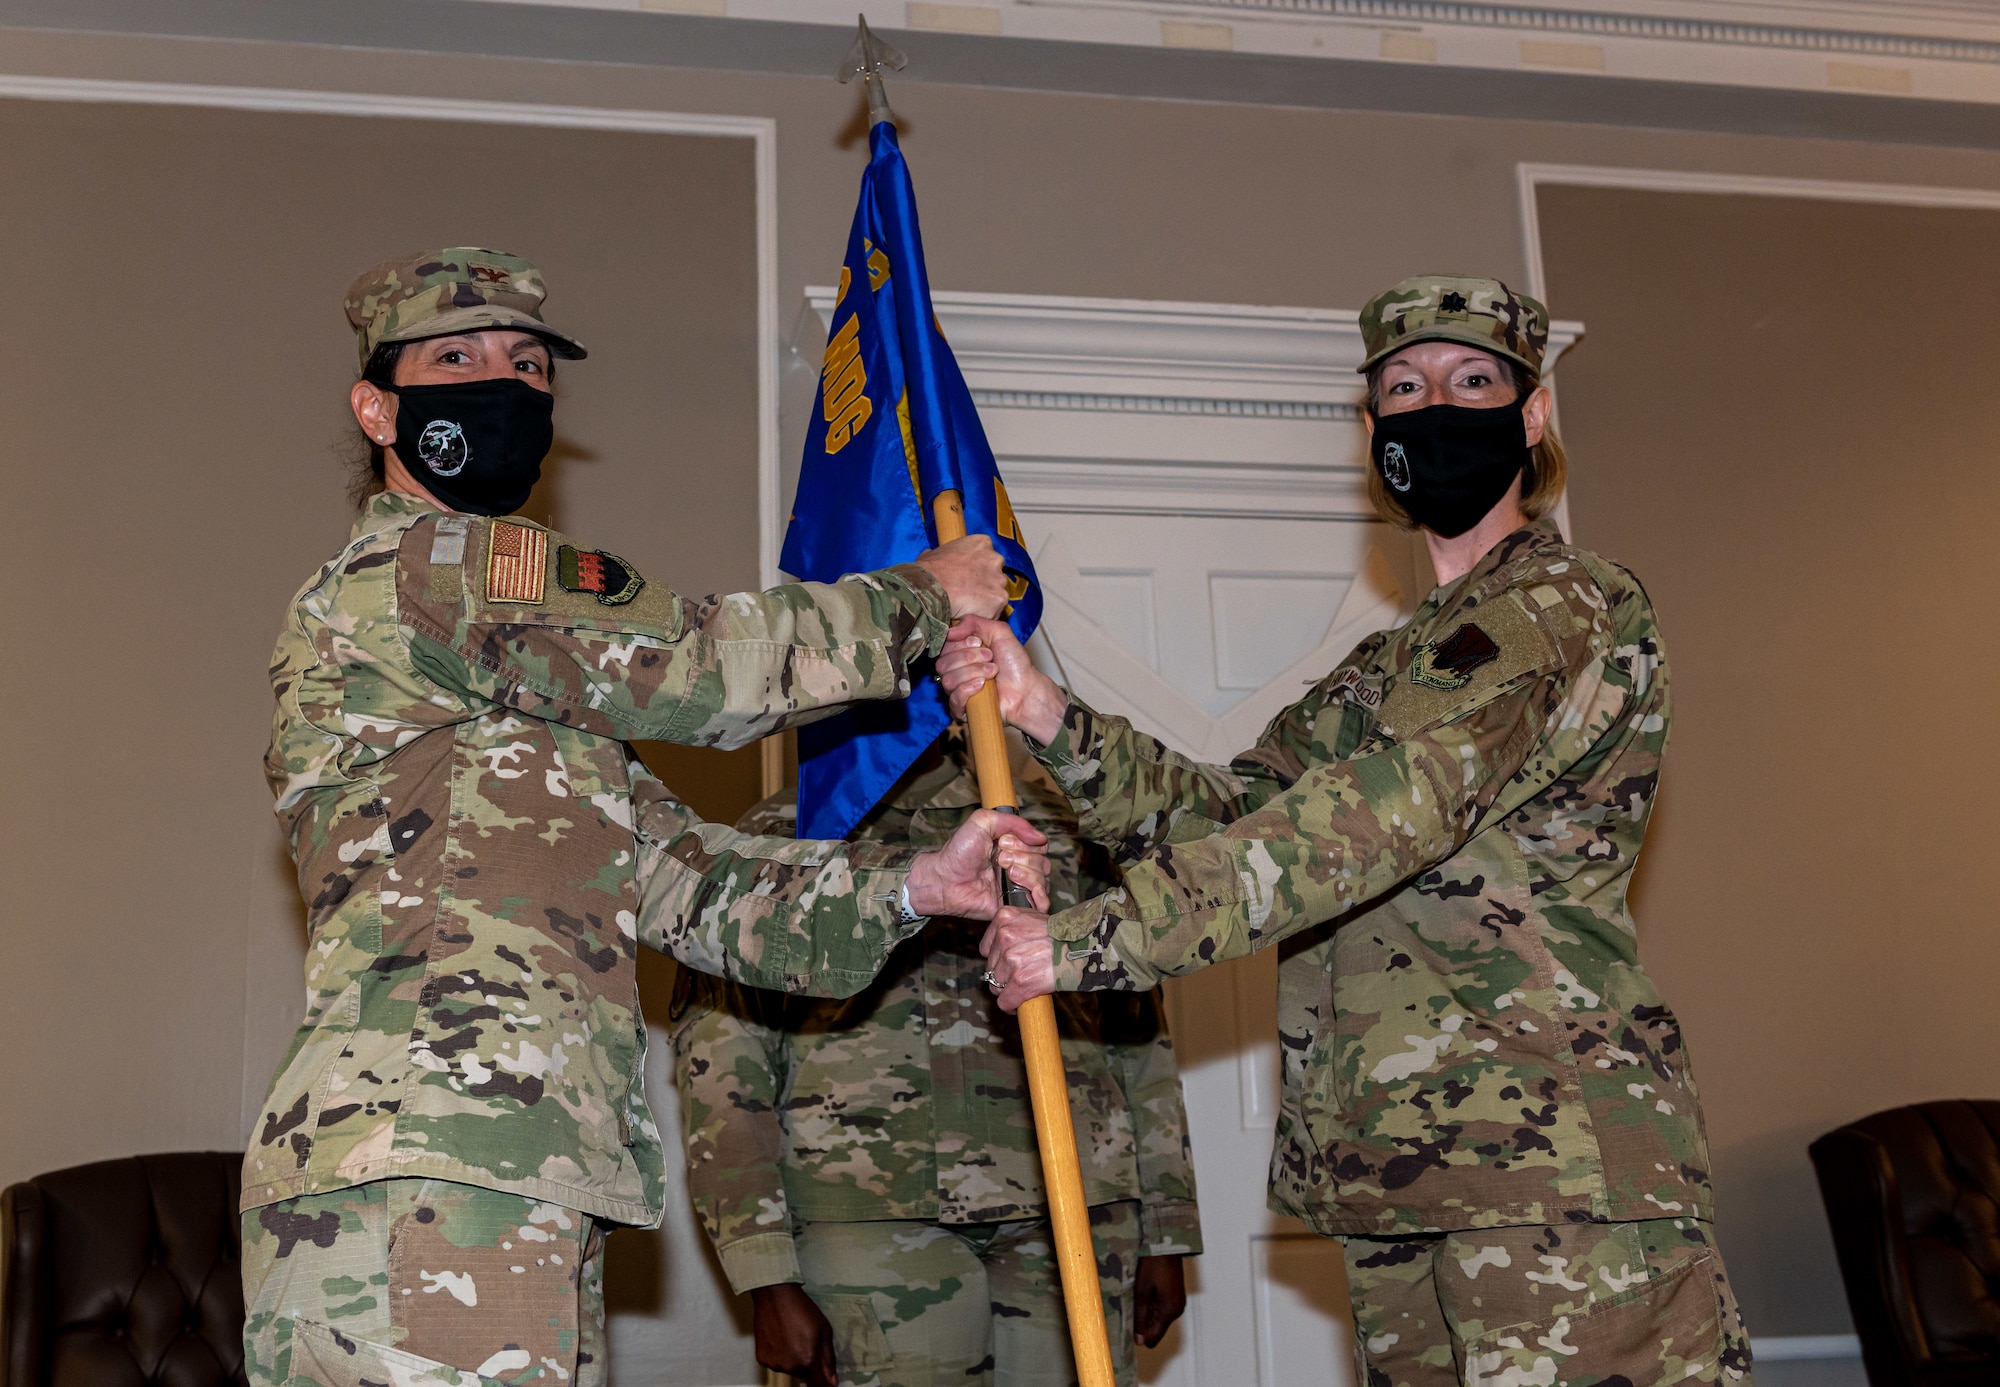 A photo of Airmen holding a flag.